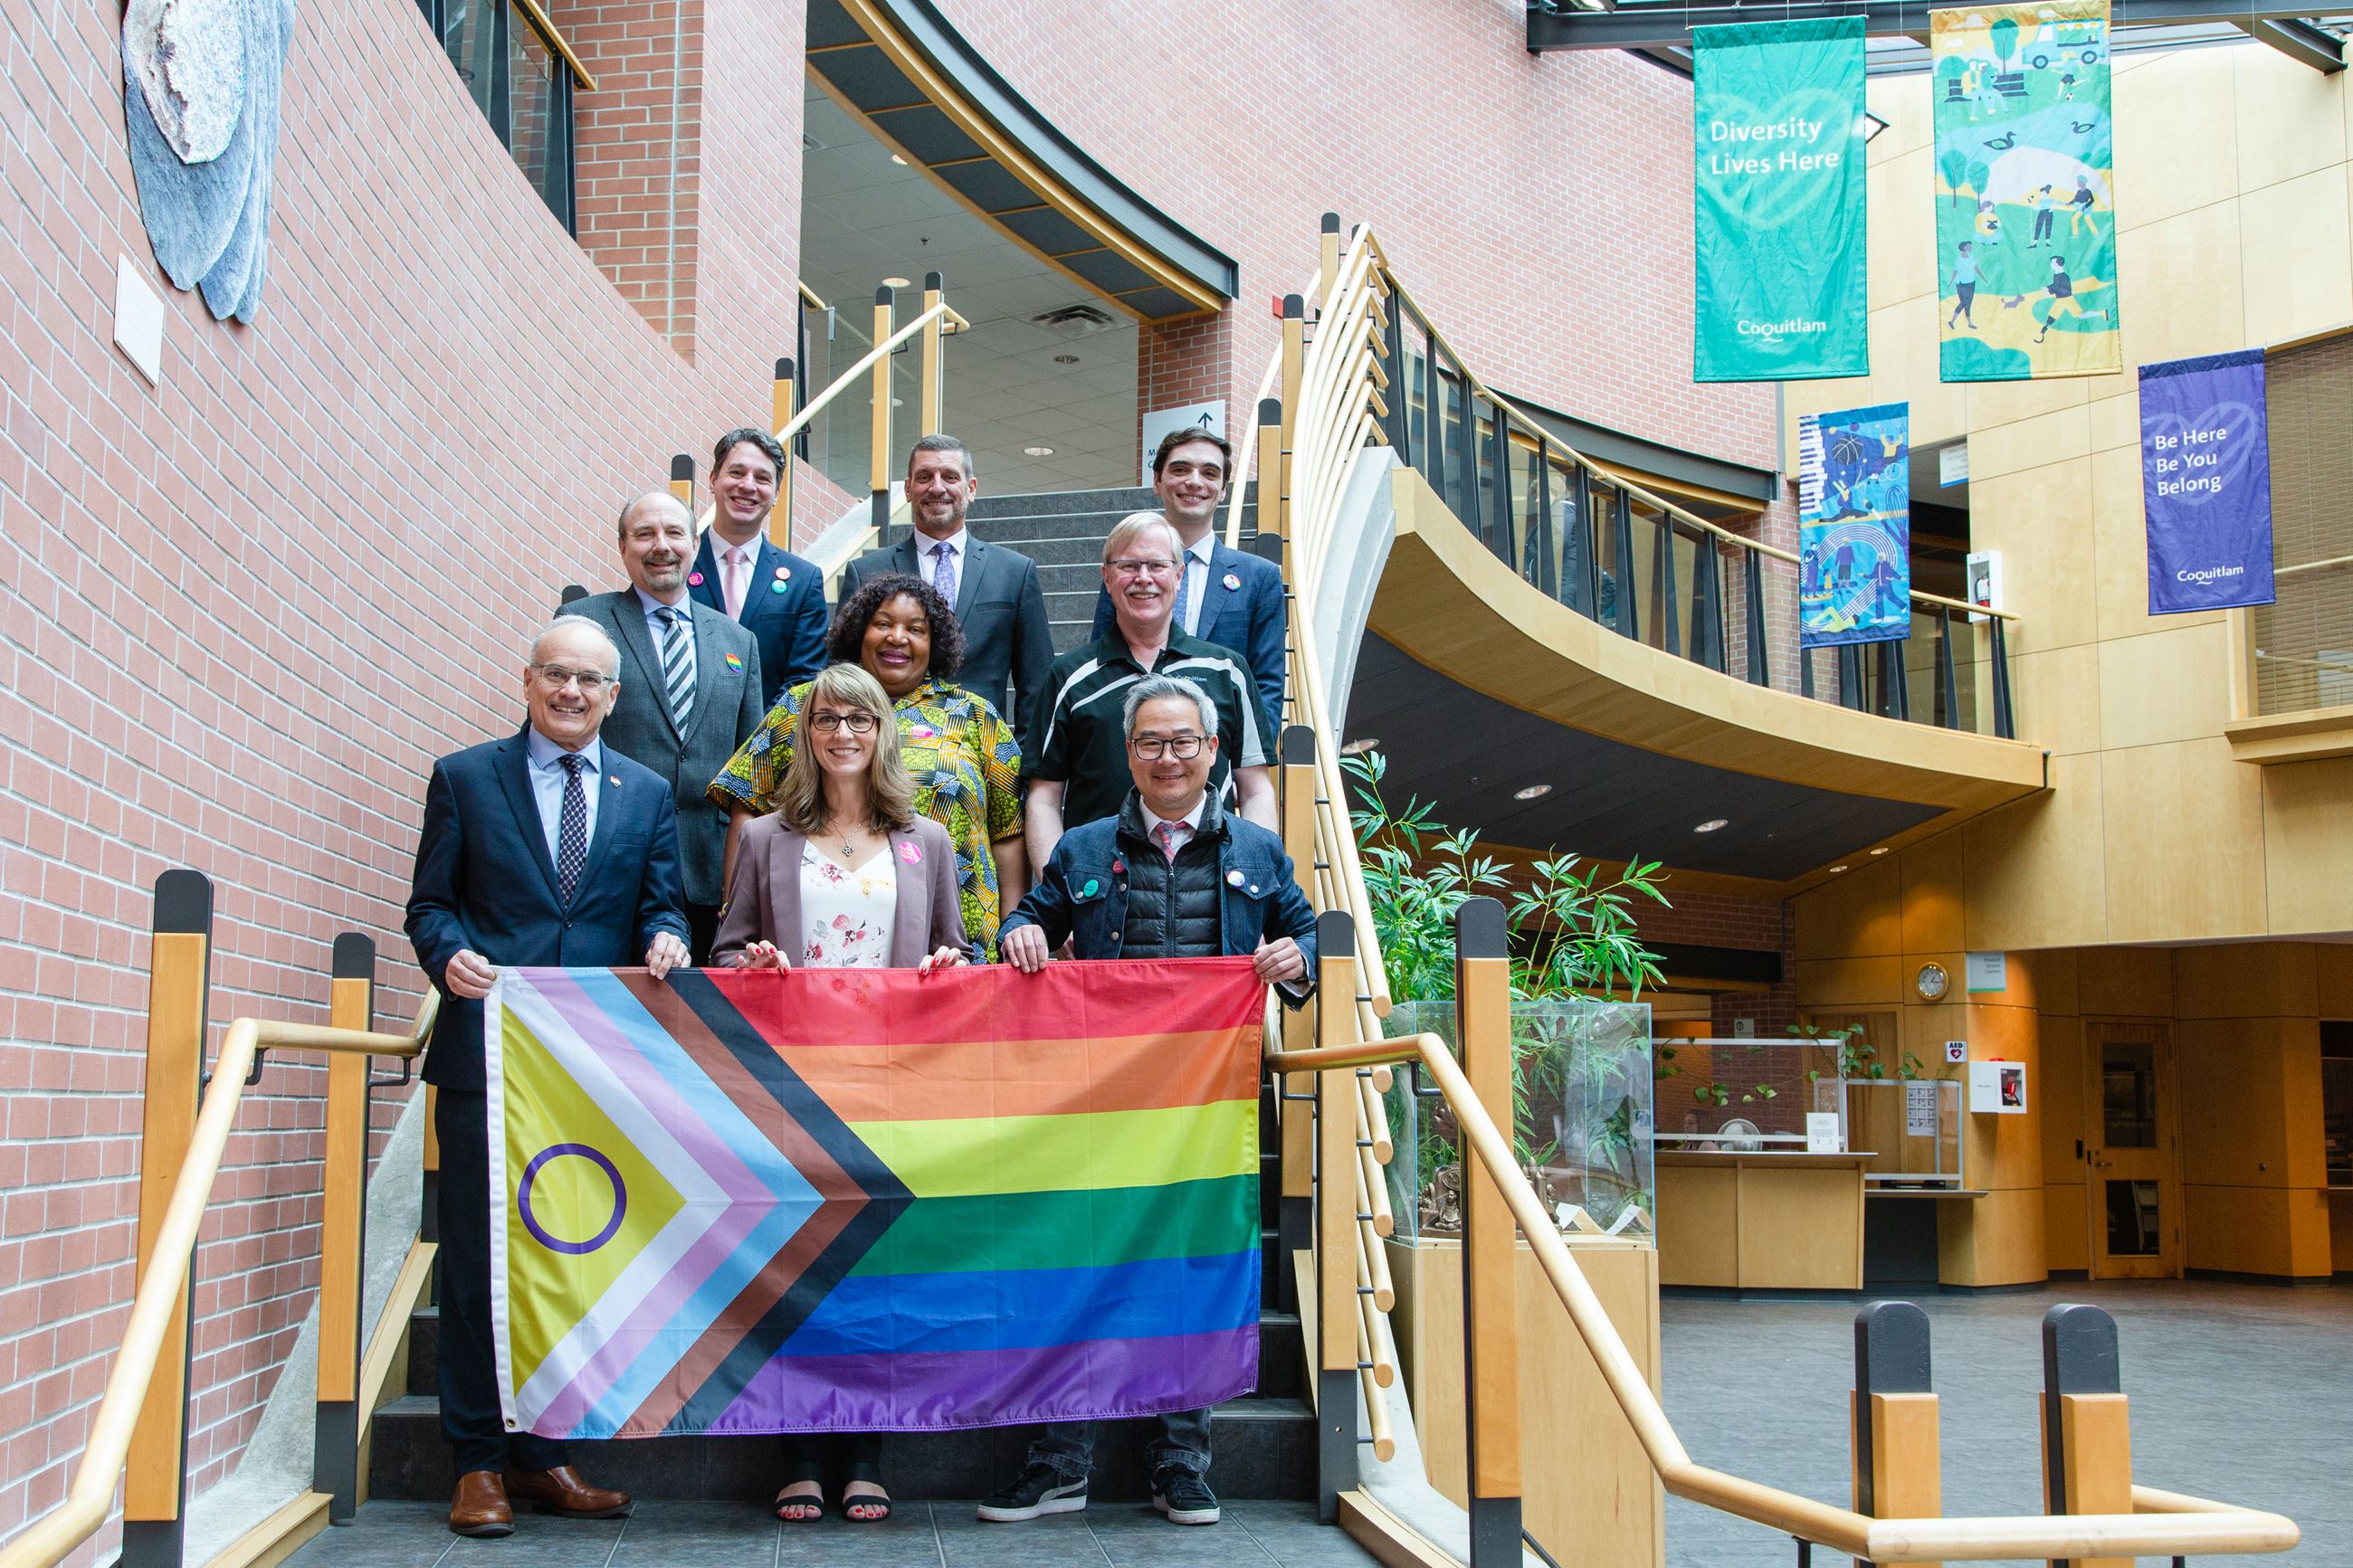 Coquitlam City Council holding the Pride flag